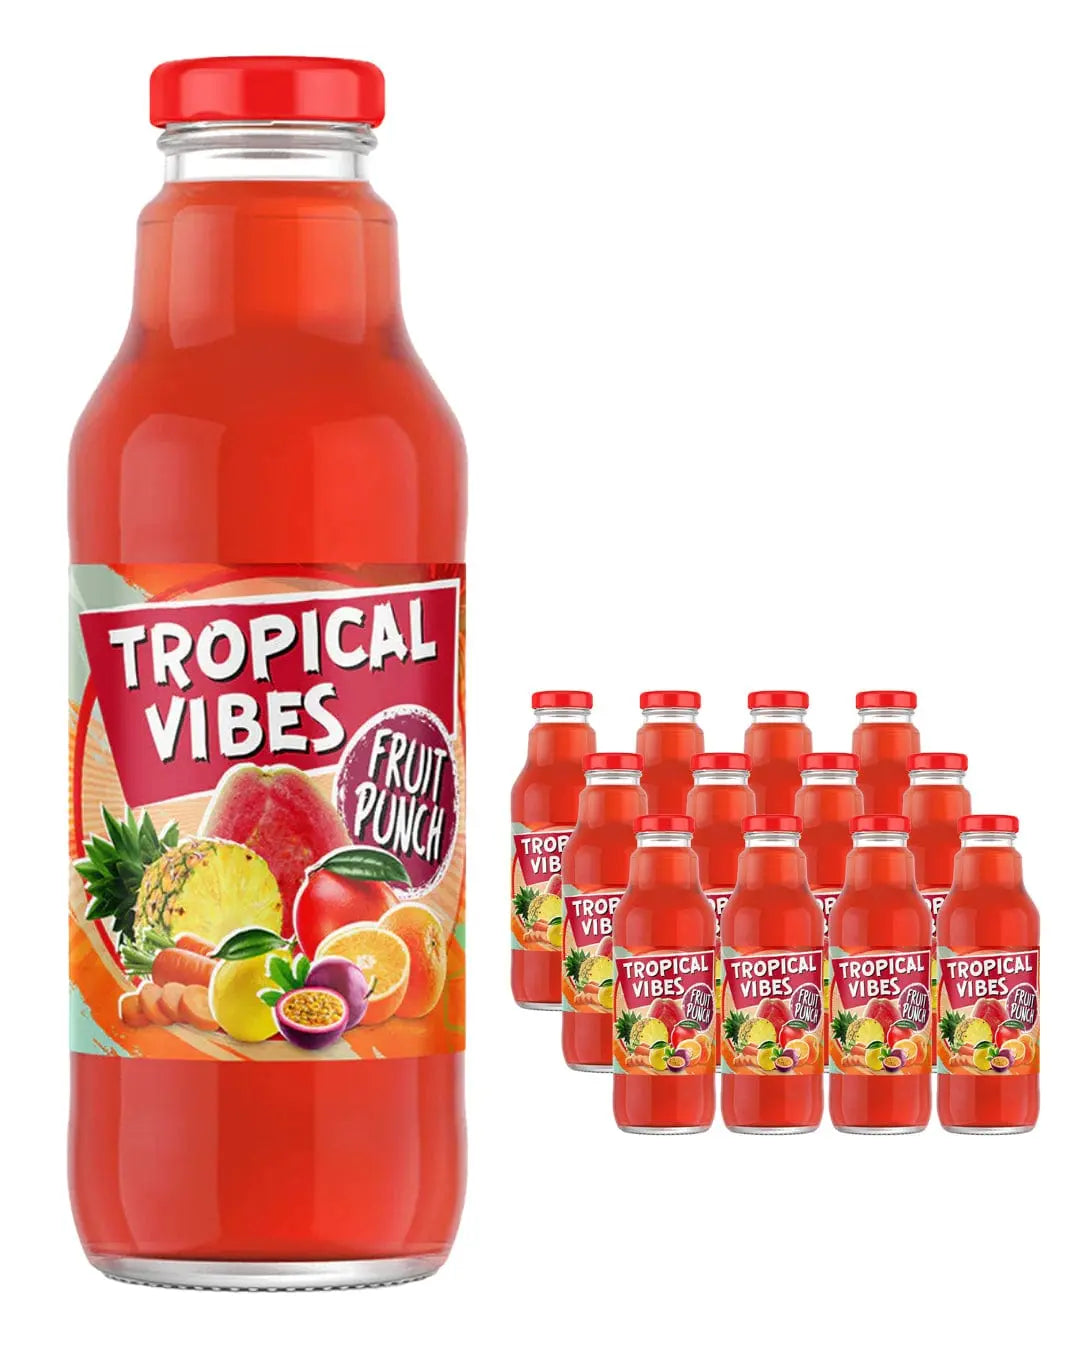 Tropical Vibes Fruit Punch Multipack, 12 x 532 ml Soft Drinks & Mixers